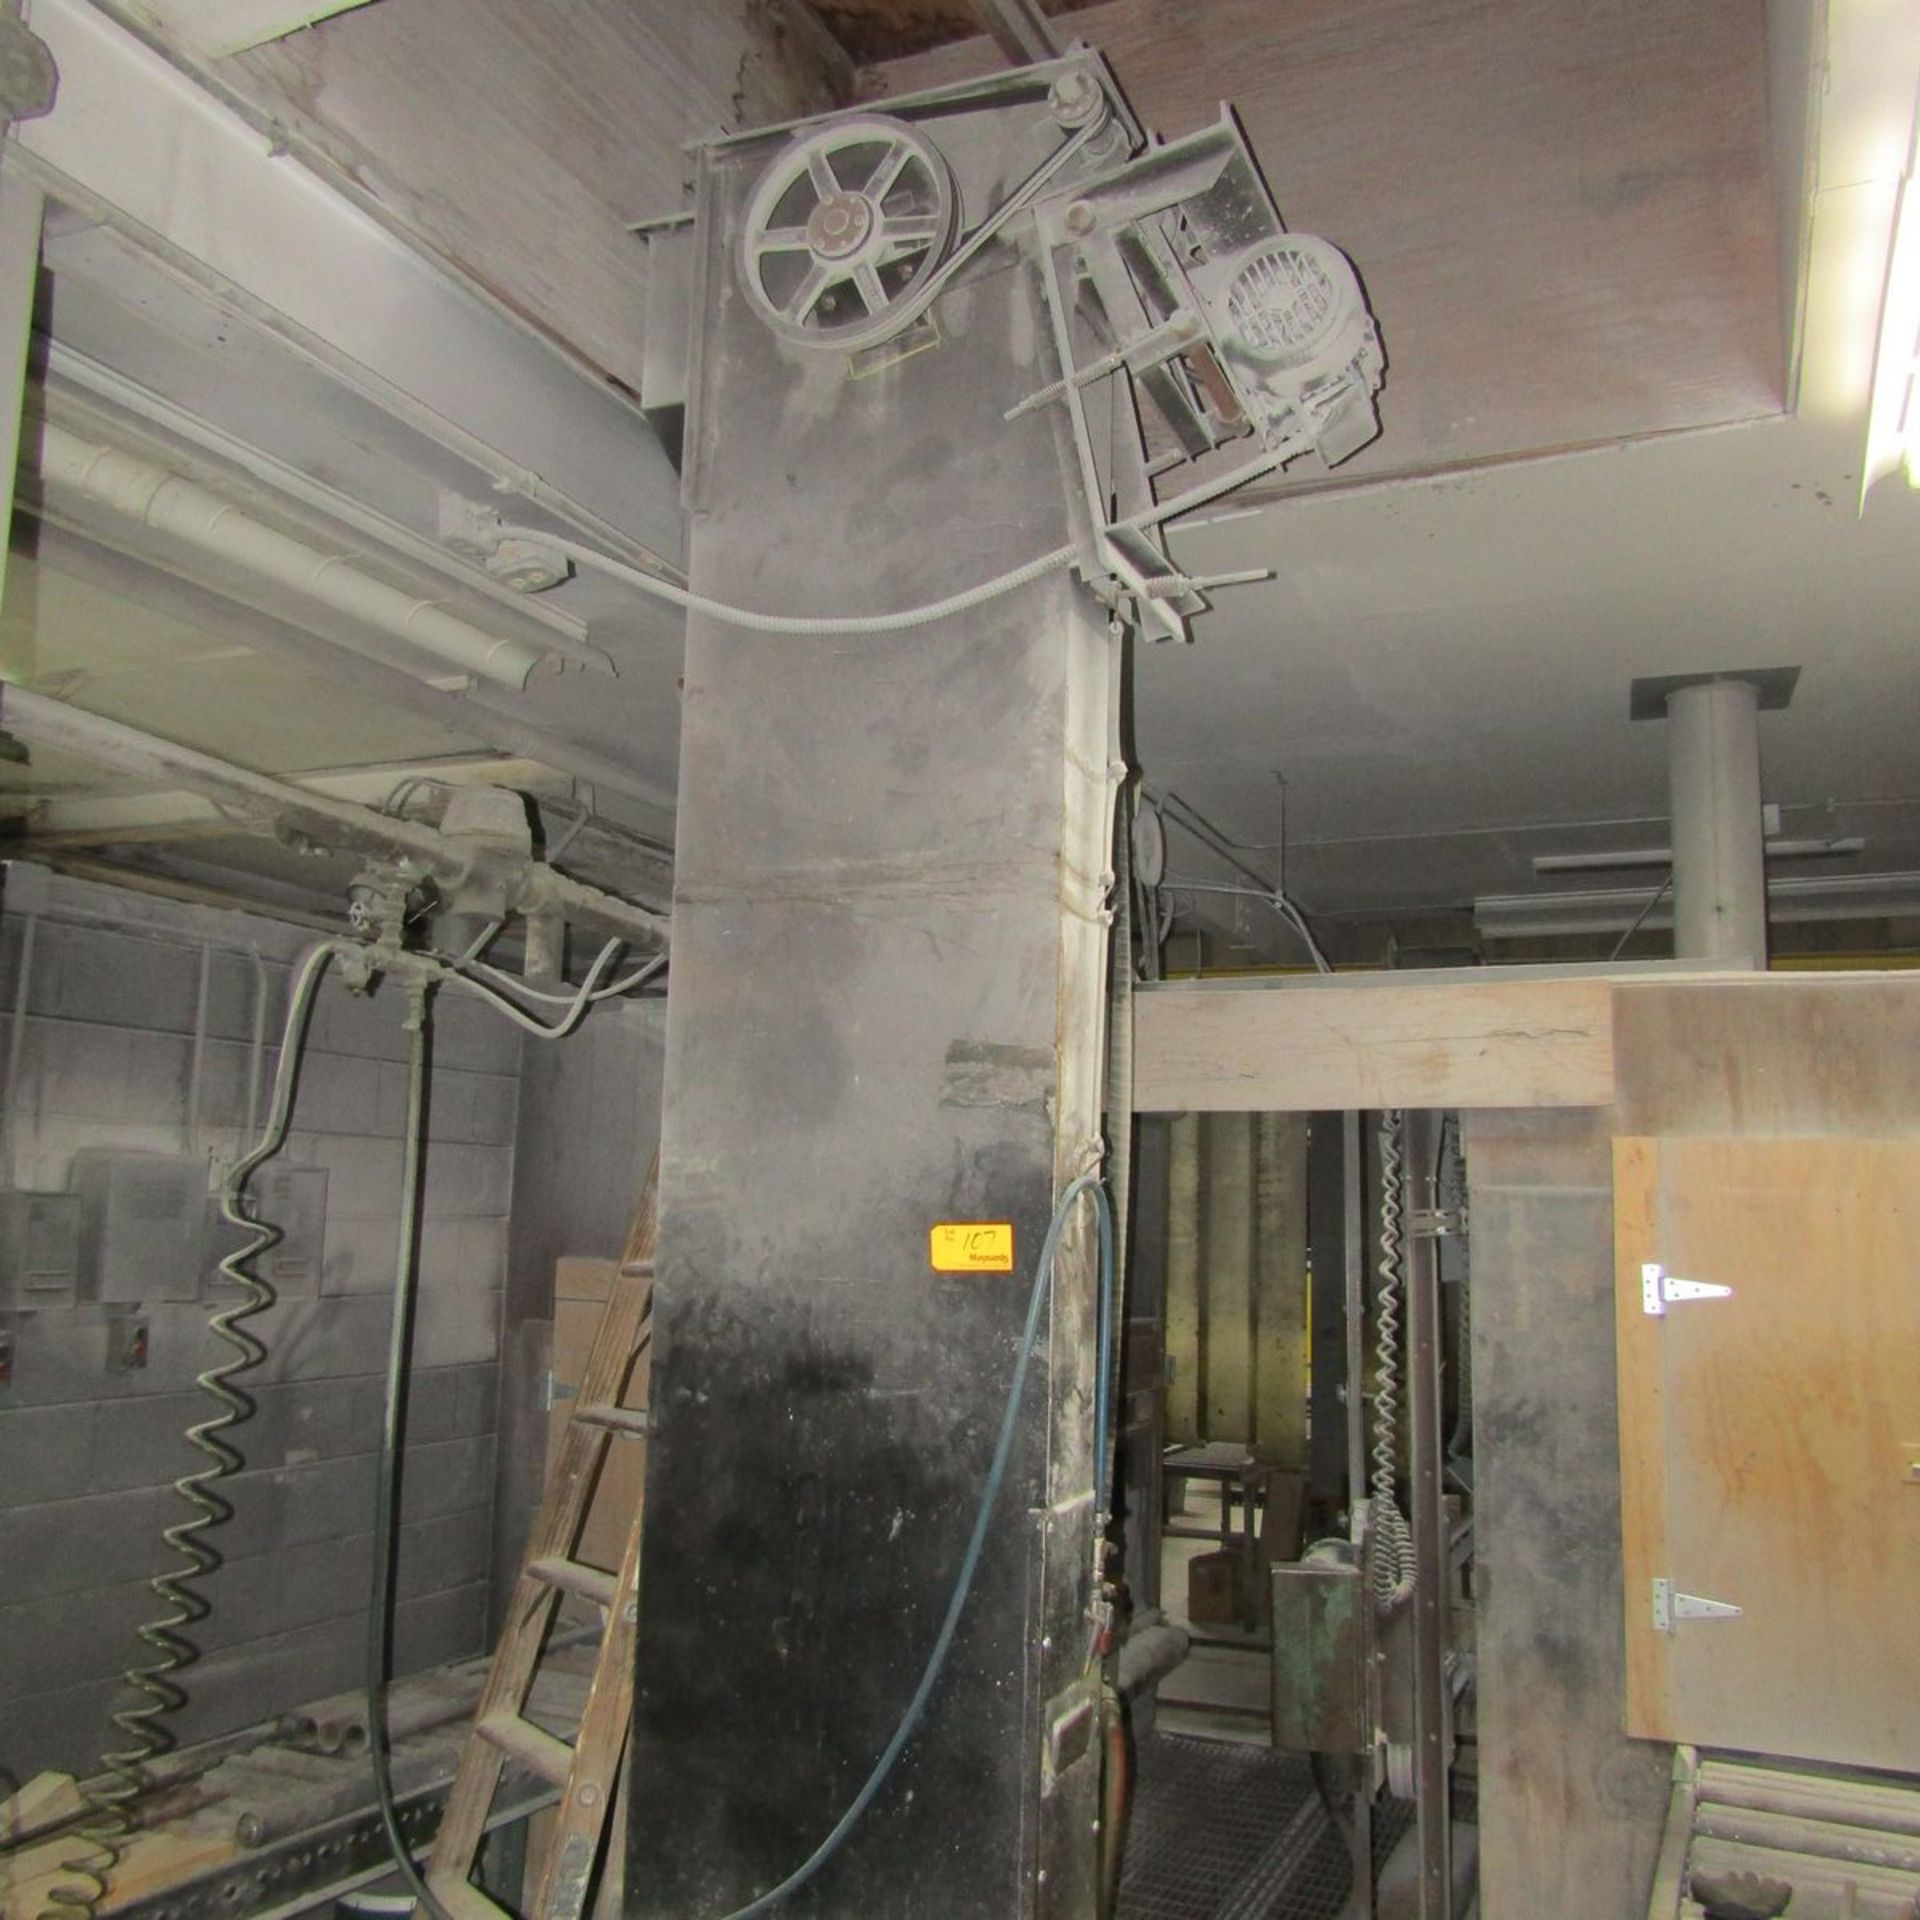 Ruemelin D-6440 Dust Collection System